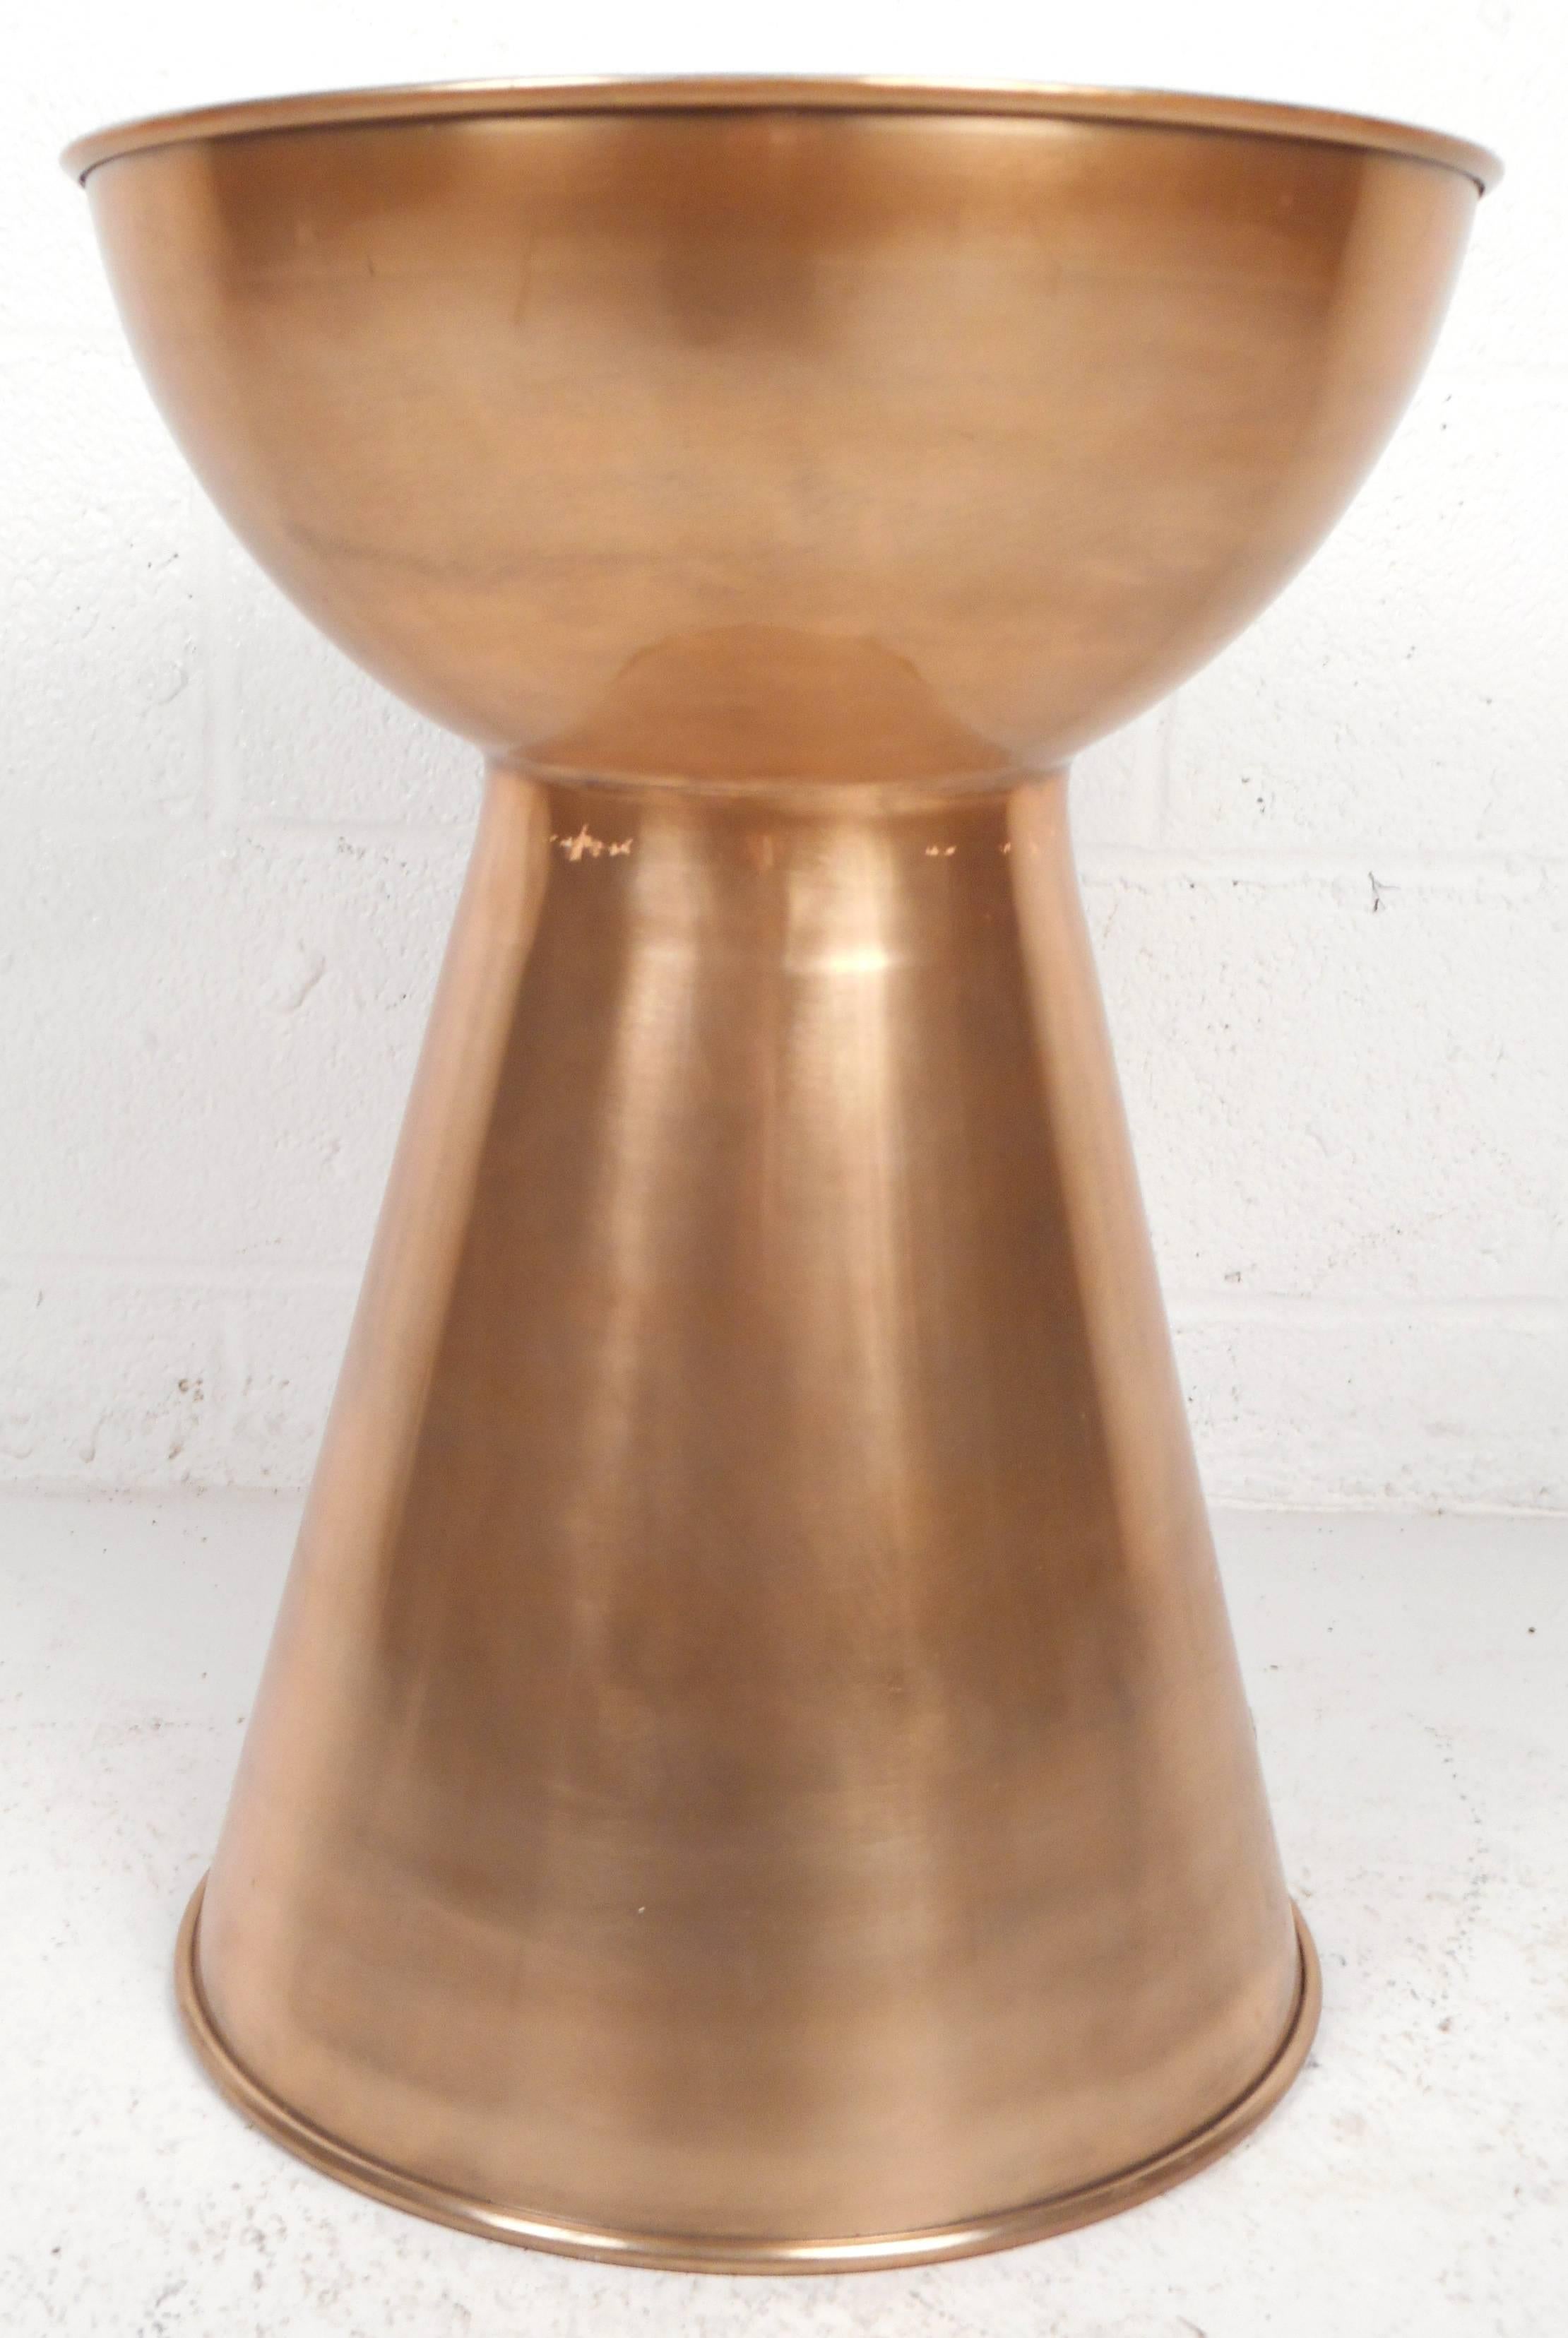 Stunning contemporary modern pedestal features a sculpted hourglass design. The genuine copper finish and sleek design make it the perfect addition to any modern interior. Versatile design can be used as accent table or simply a decorative piece.